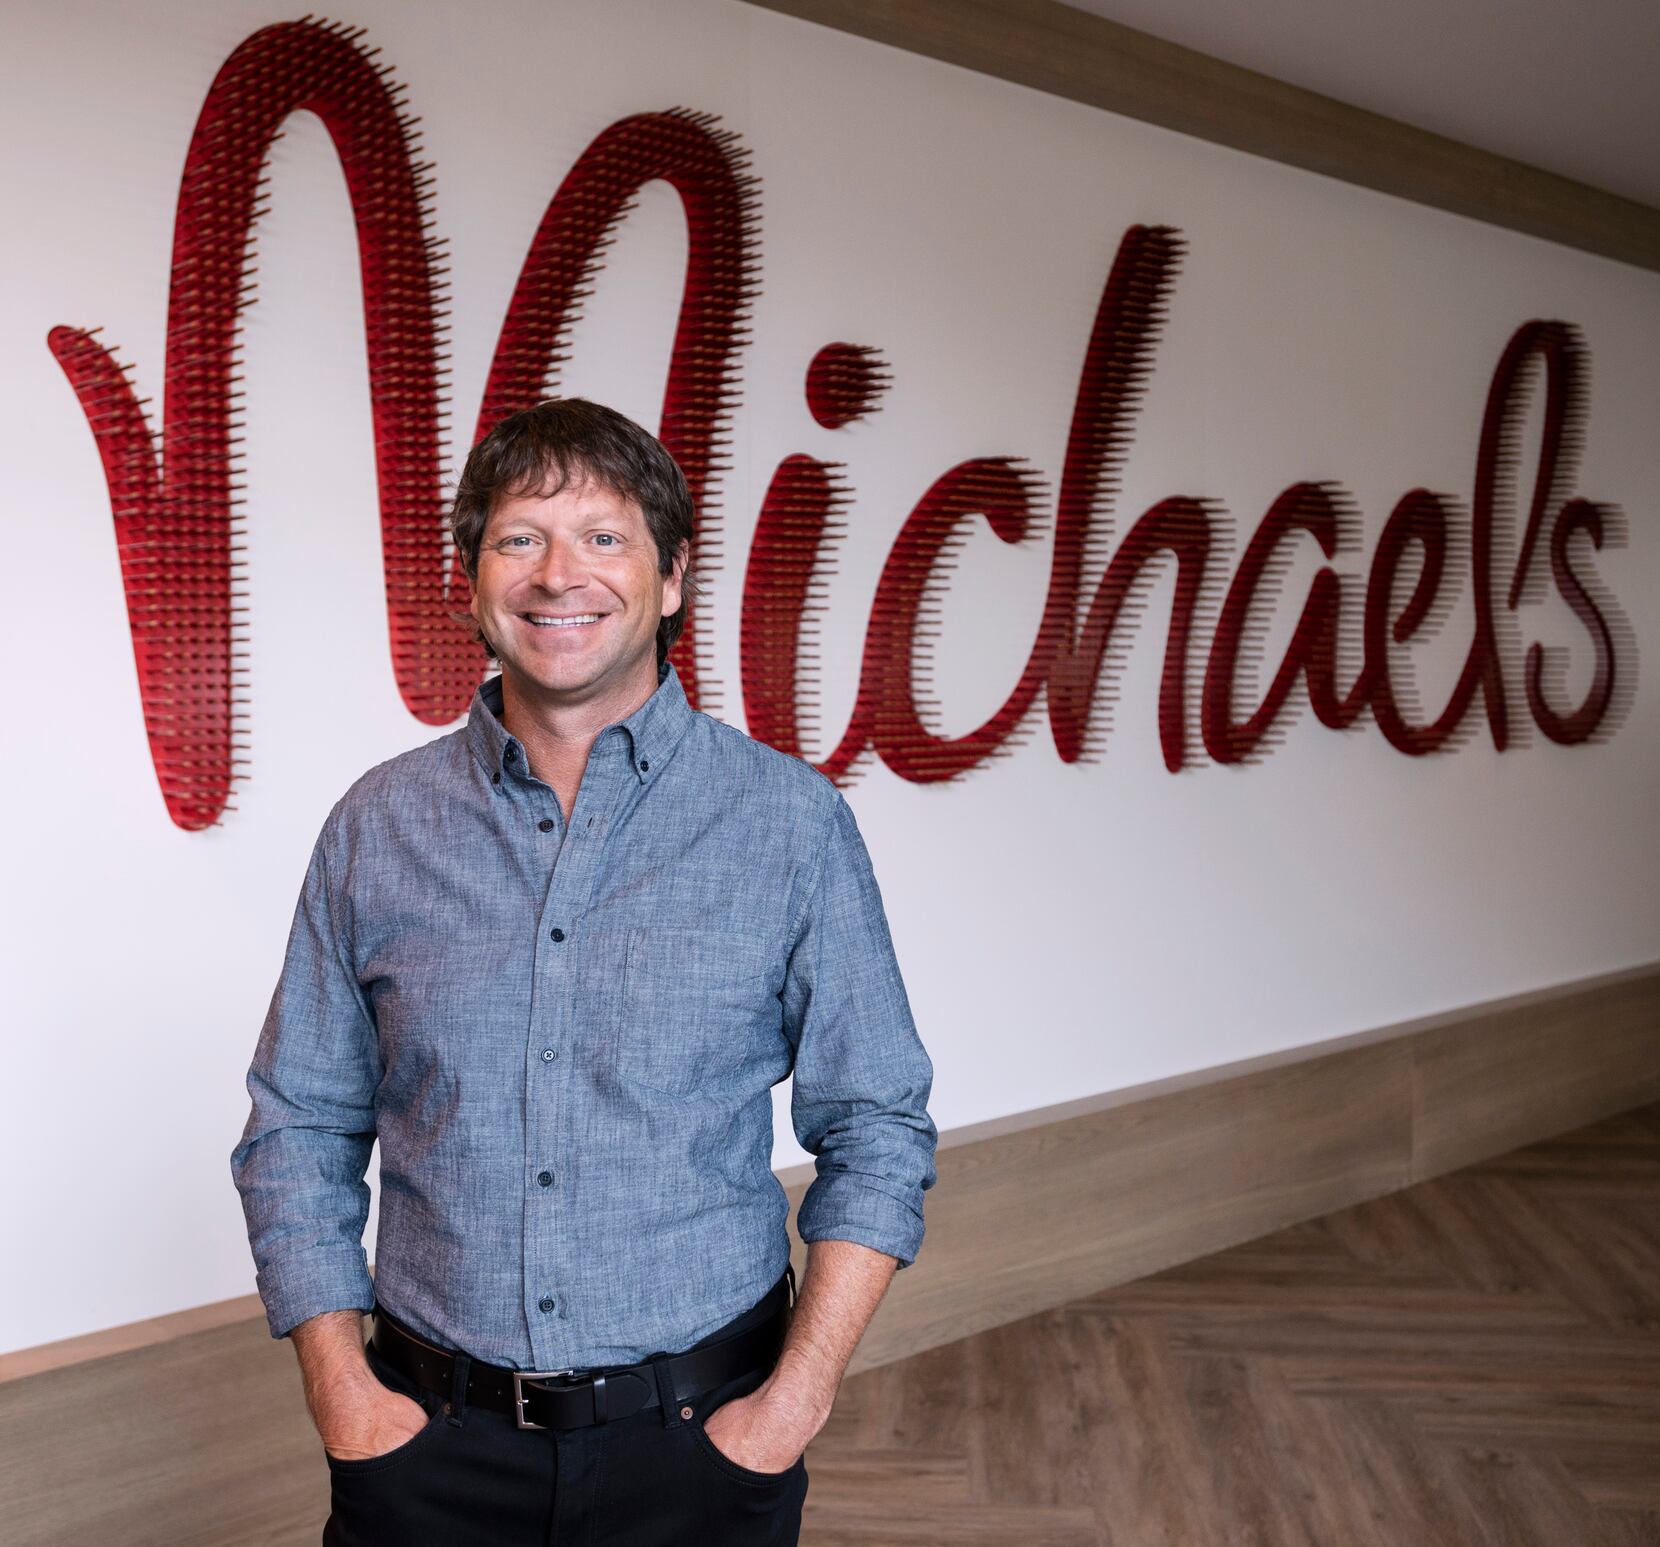 Crafts Retailer Michaels To Shut Down Nearly 100 Stores